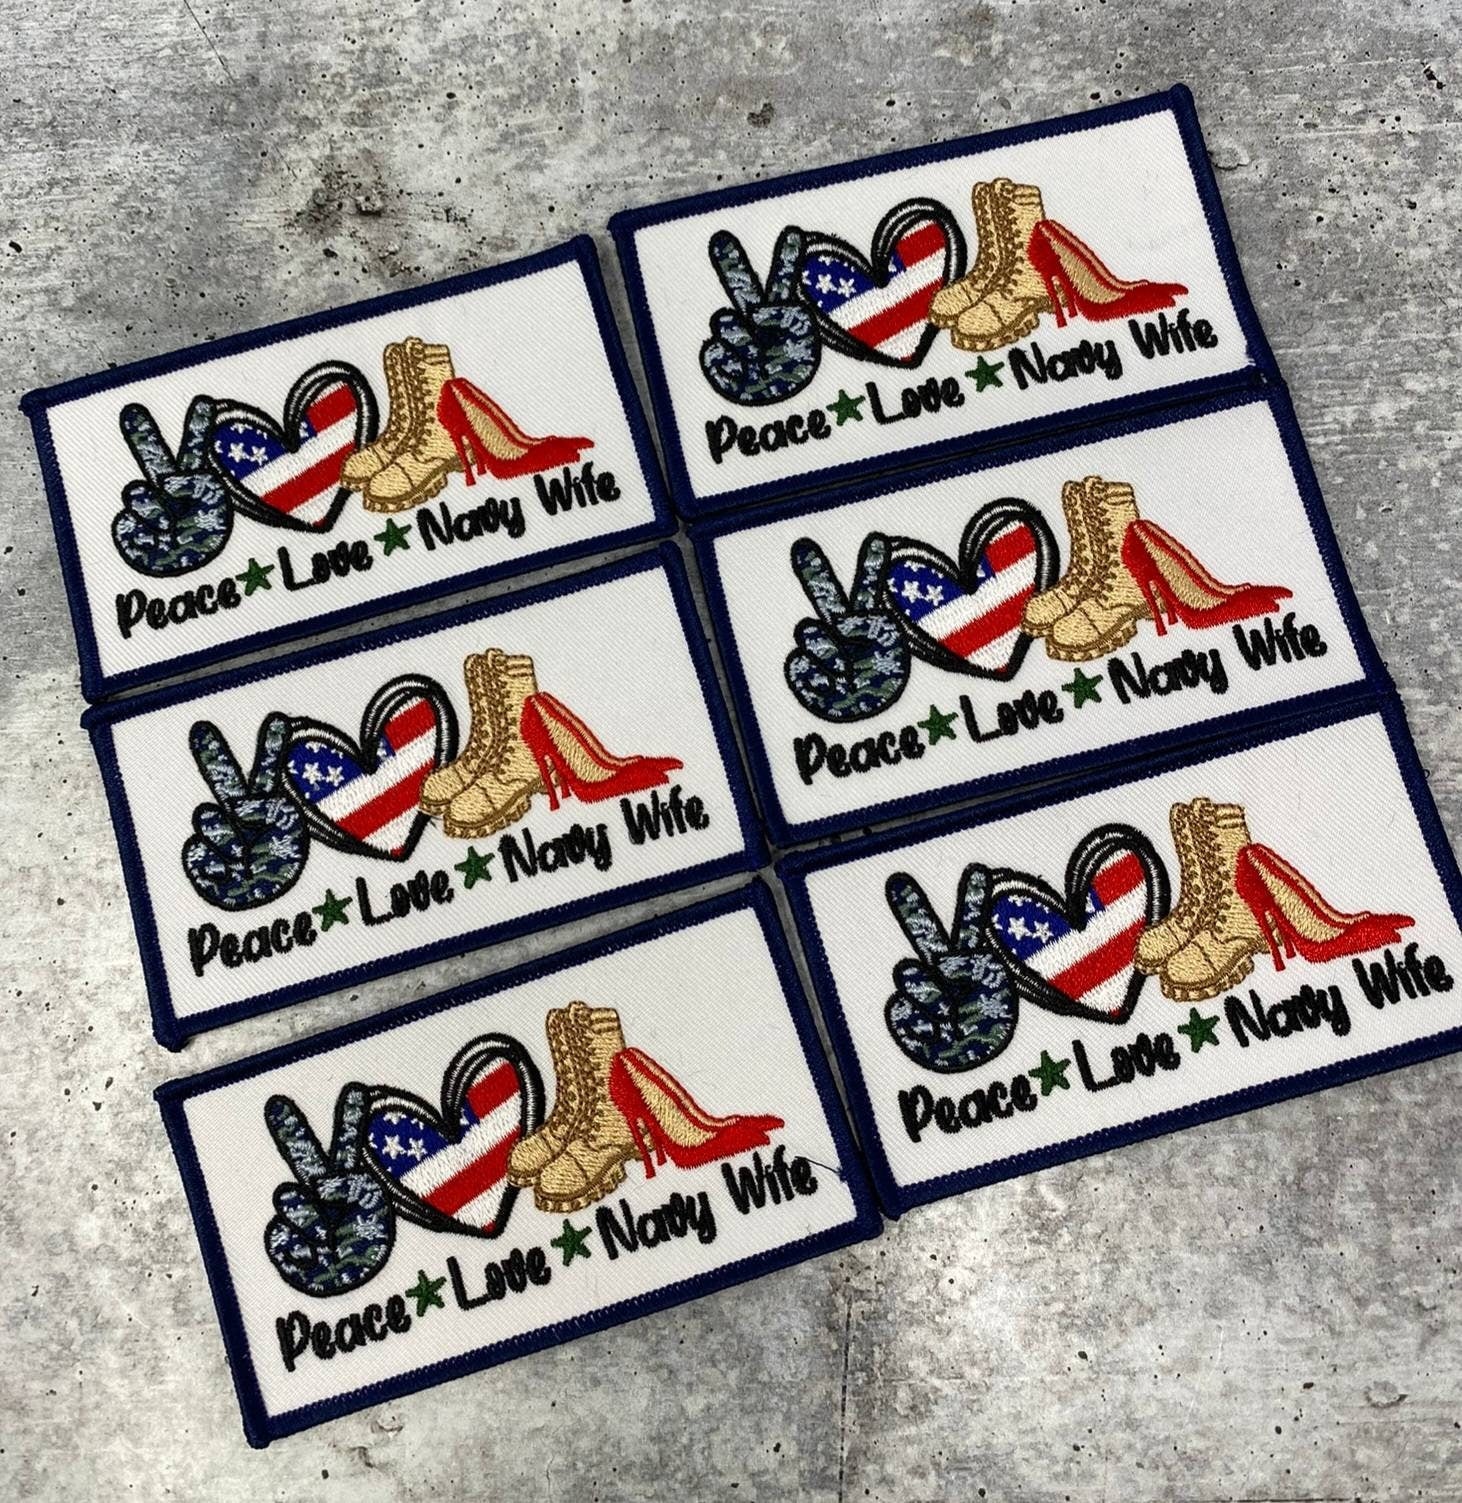 New, 1-pc, "Peace. Love. NAVY Wife" Iron-on Patch, Embroidery Patch, Size 3"x 2", Military Wife Badge, Patch for Crocs, Jackets, & DIY Craft